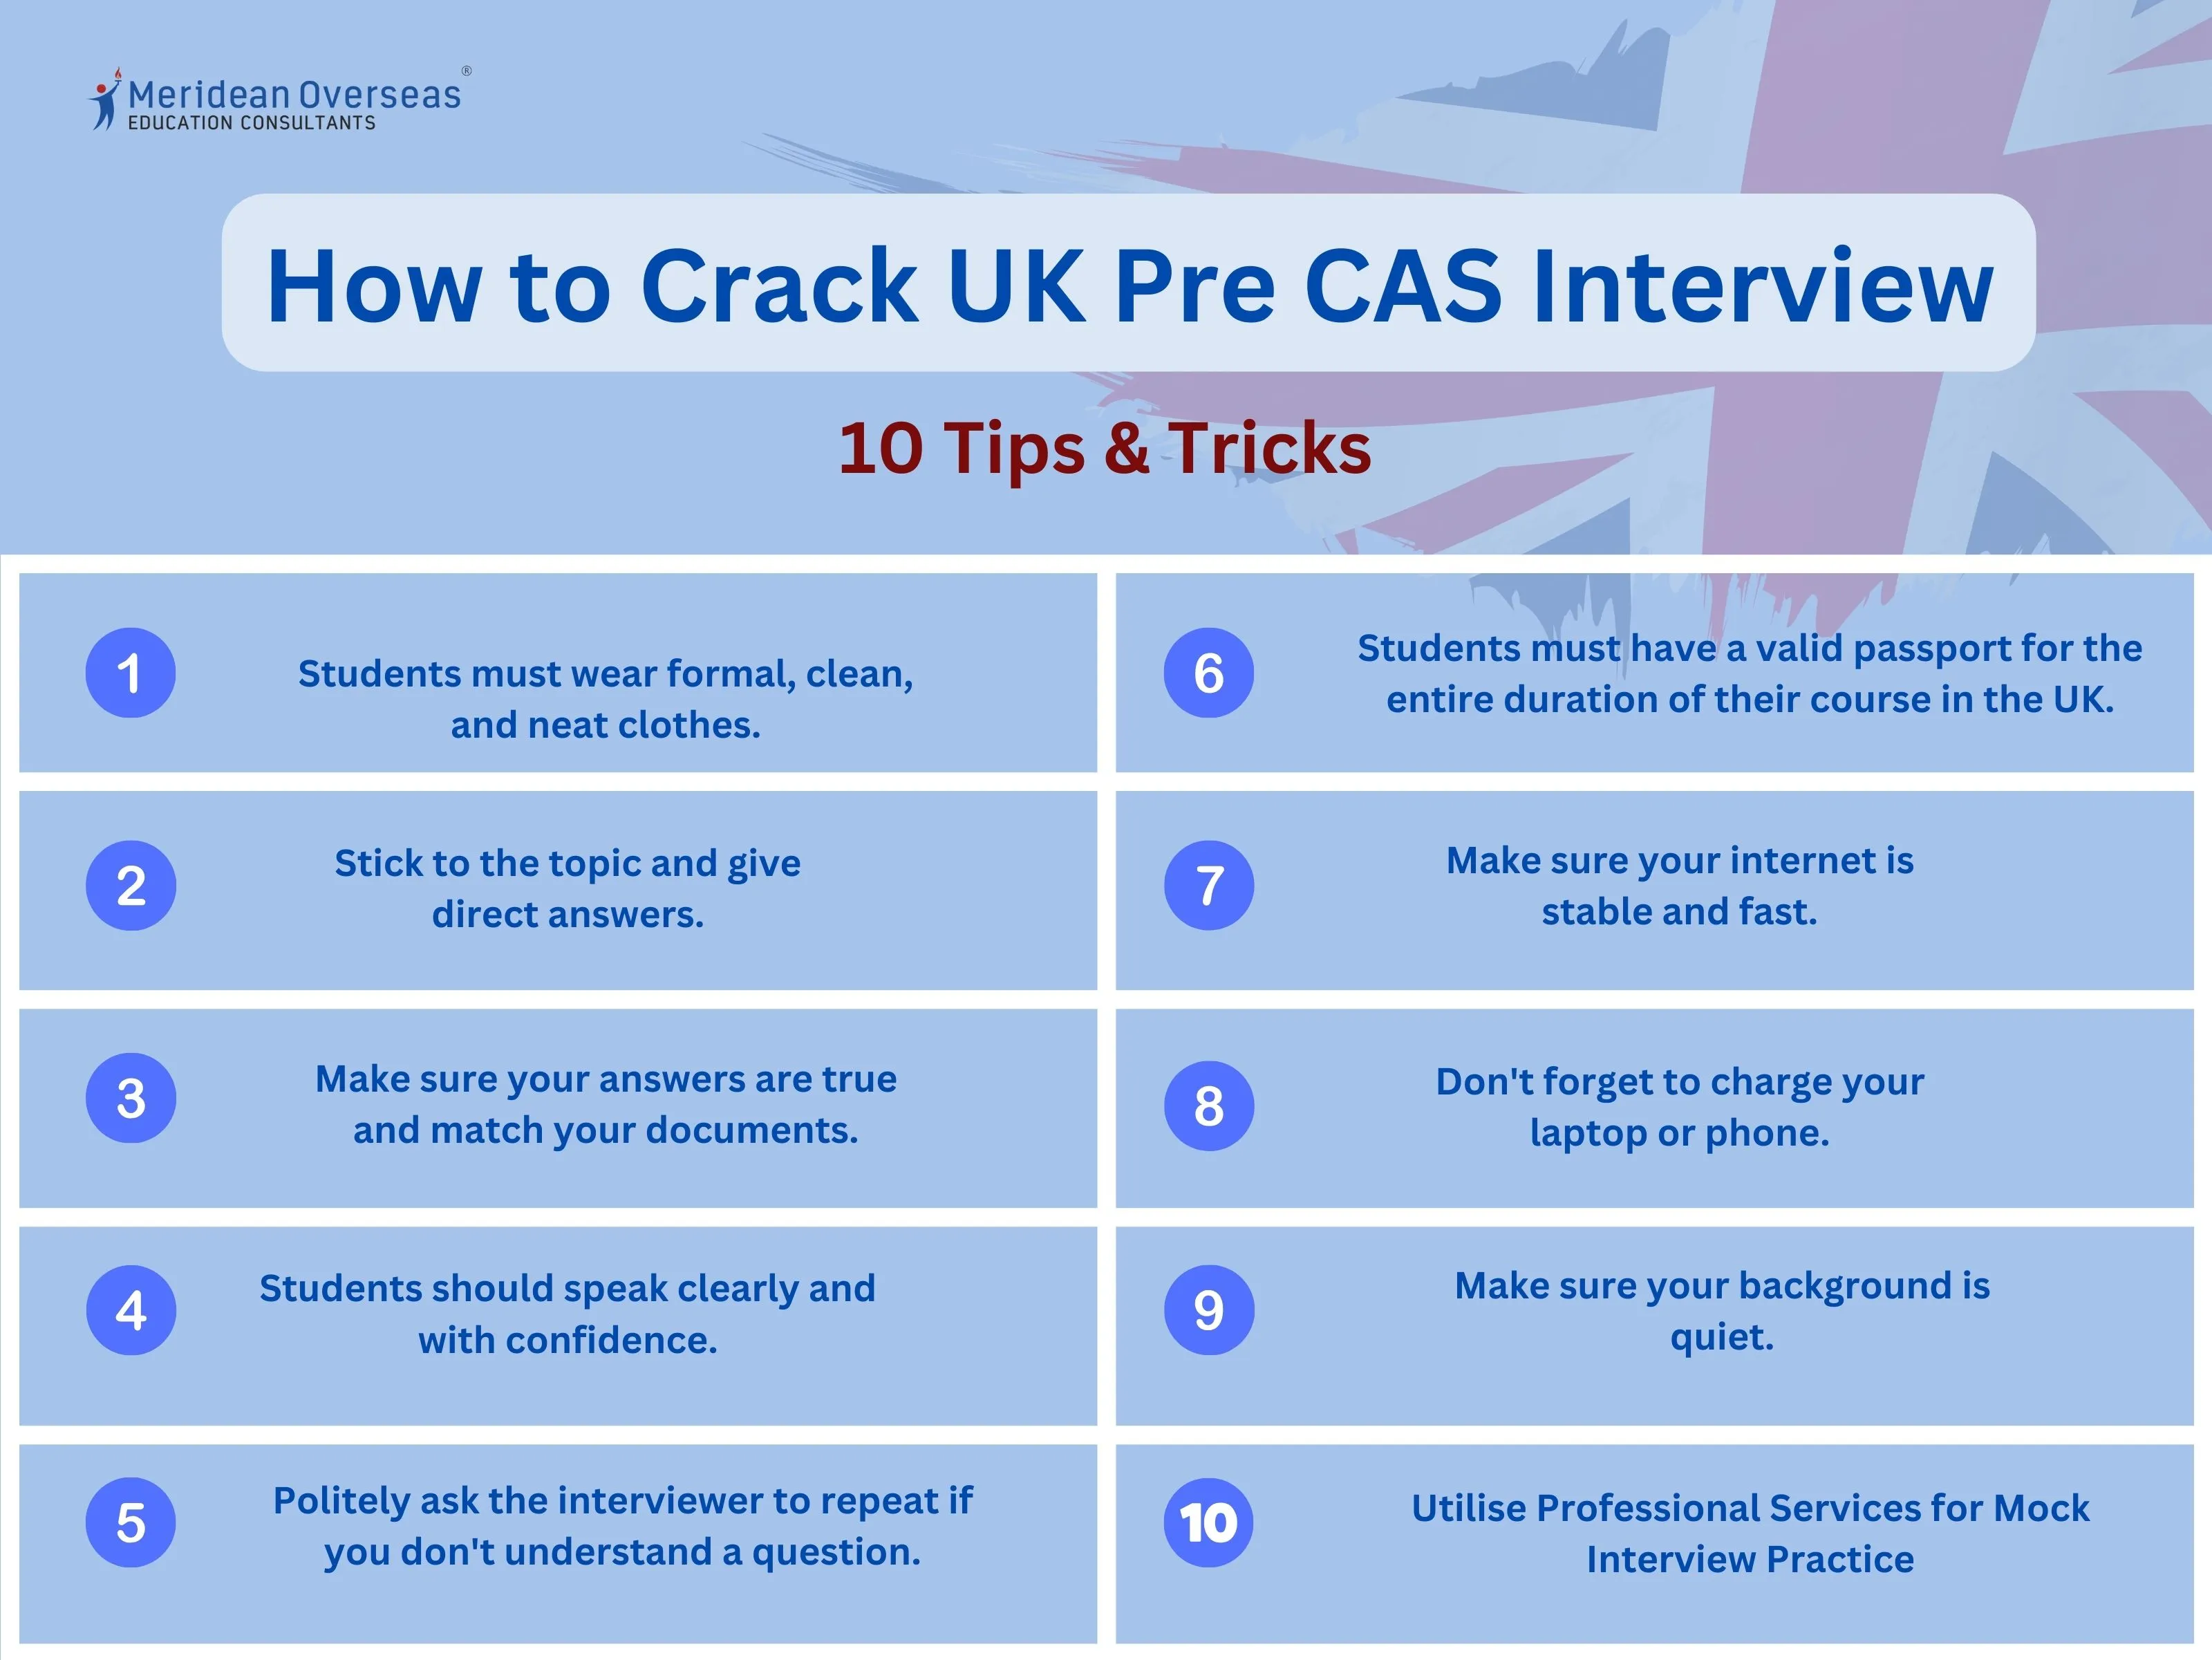 How to Crack UK Pre CAS Interview